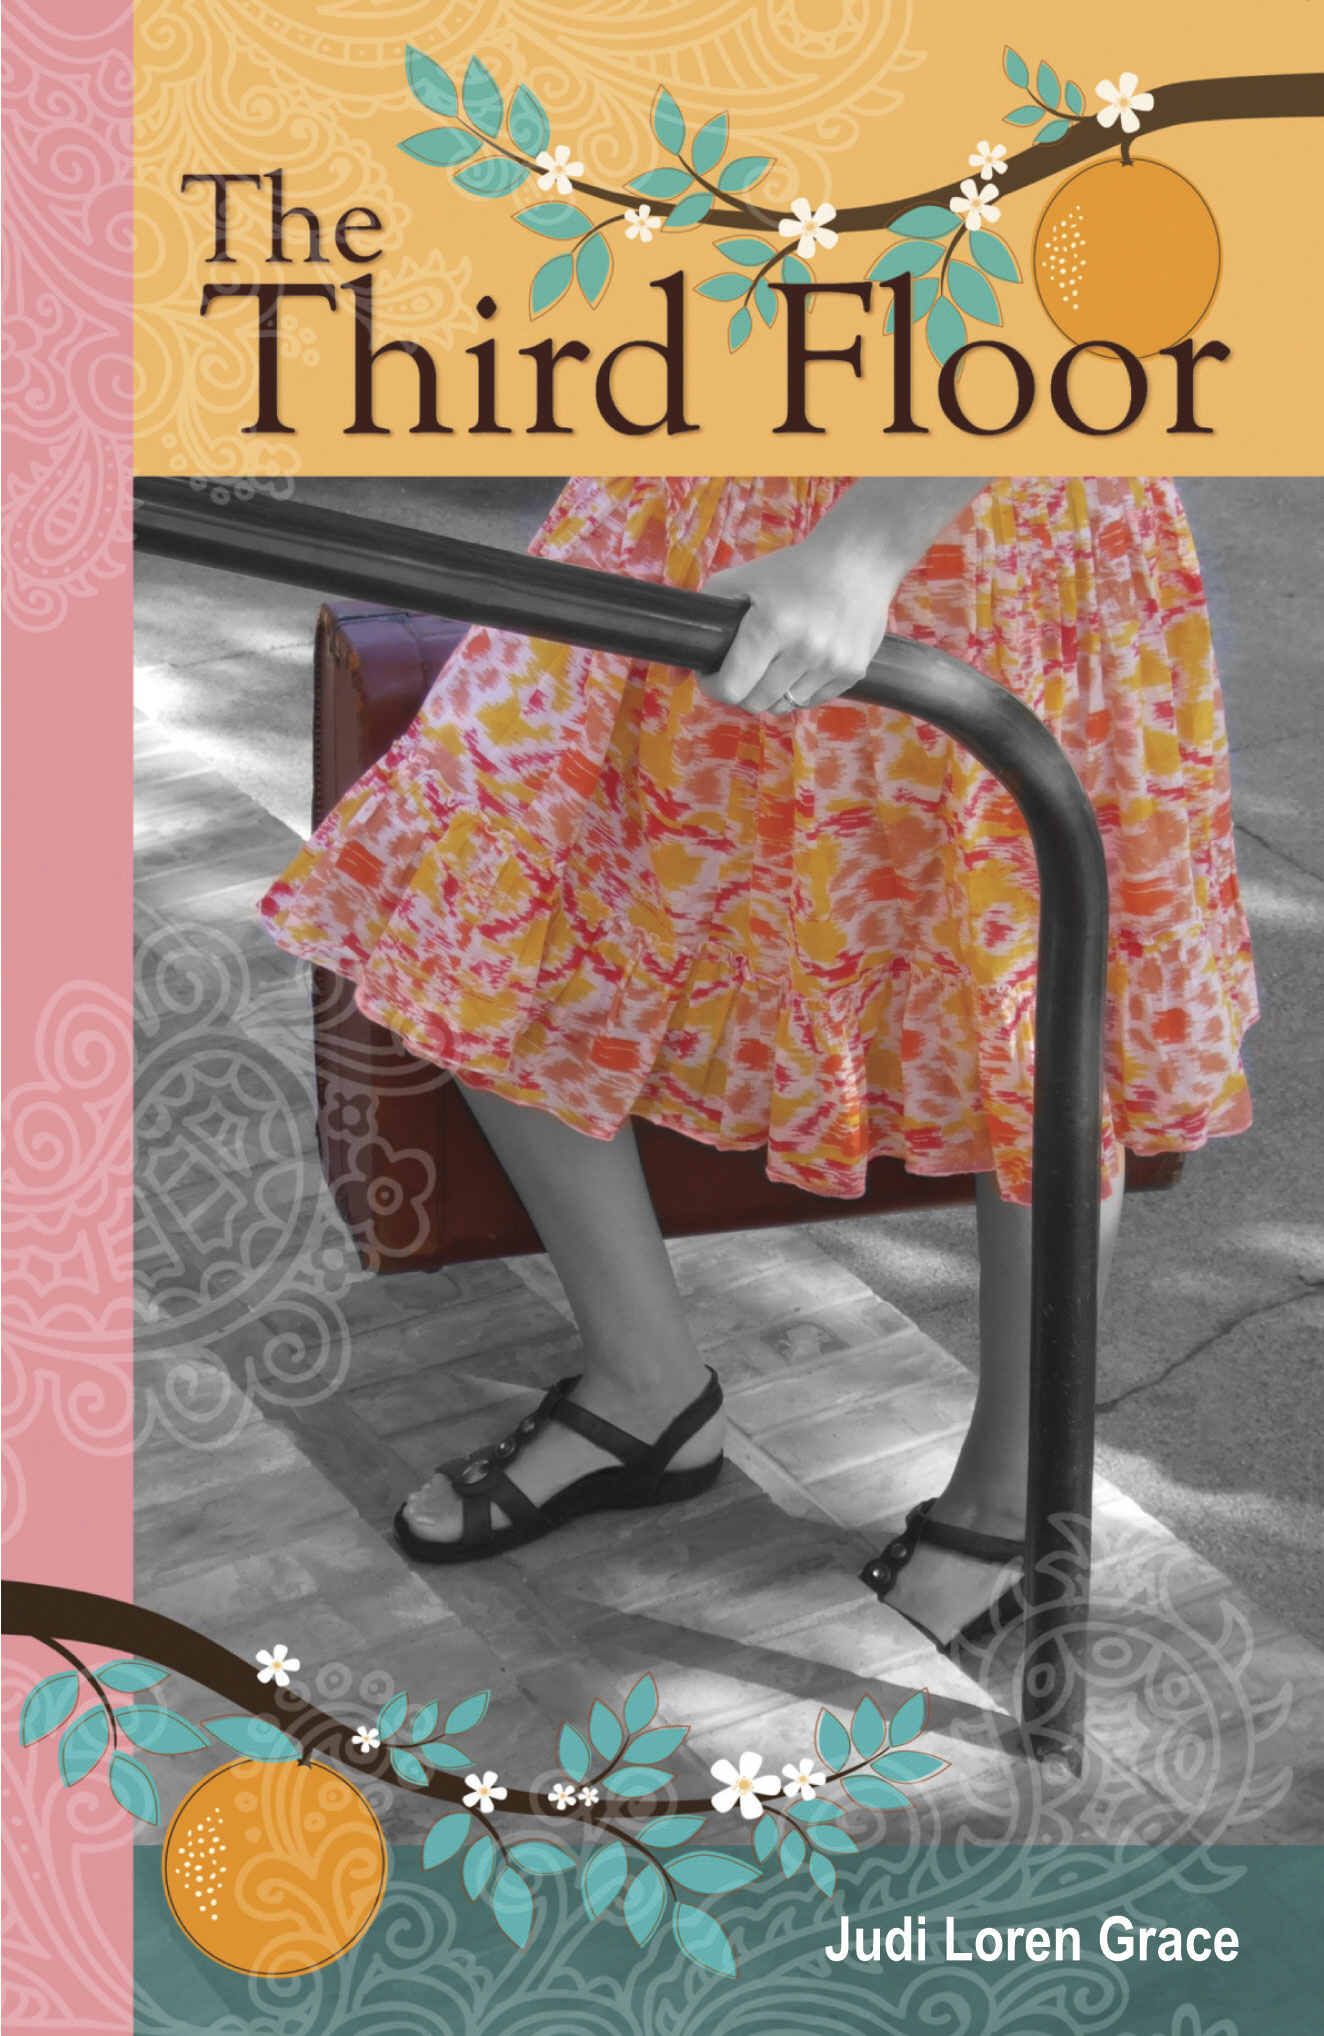 The Third Floor, click to order